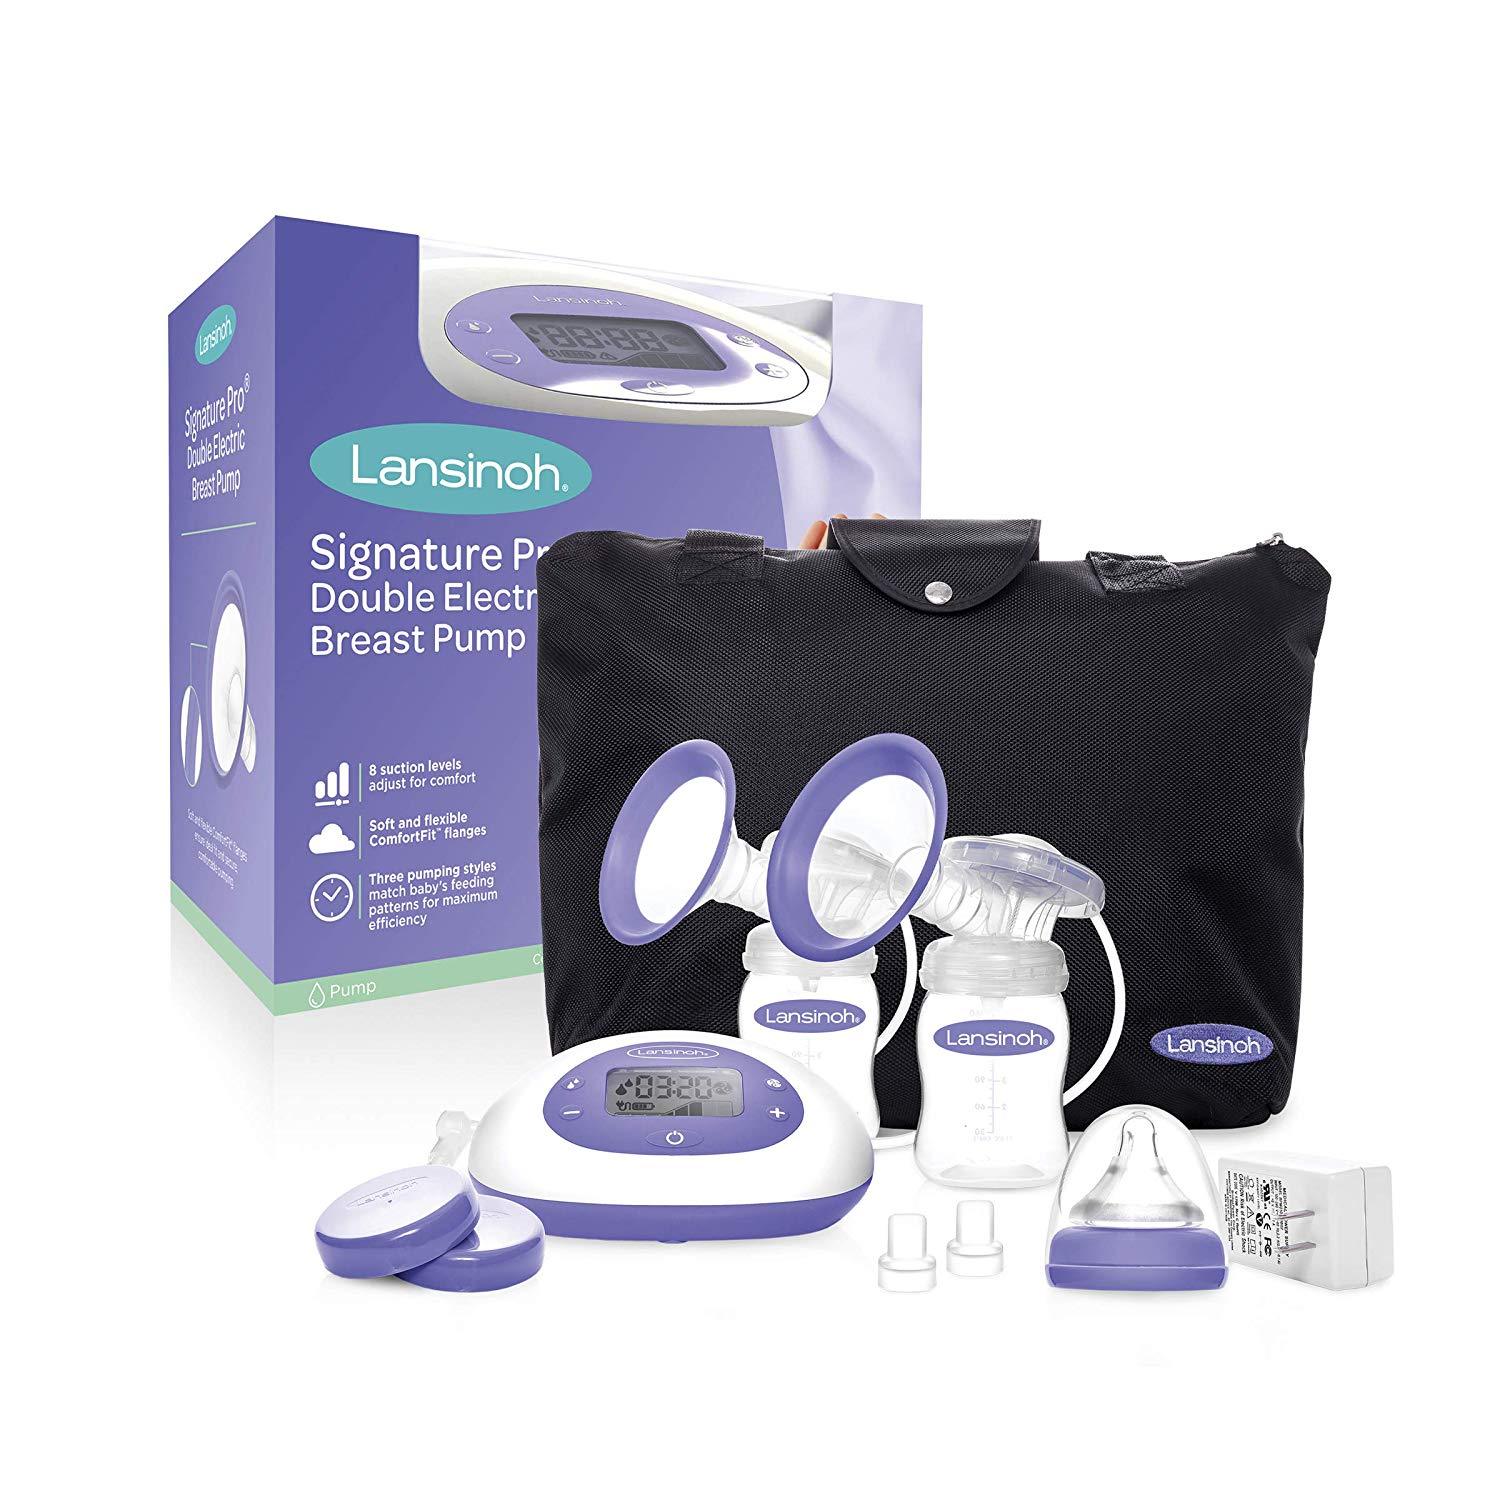 Image of Signature Pro? Double Electric Breast Pump with Tote Bag